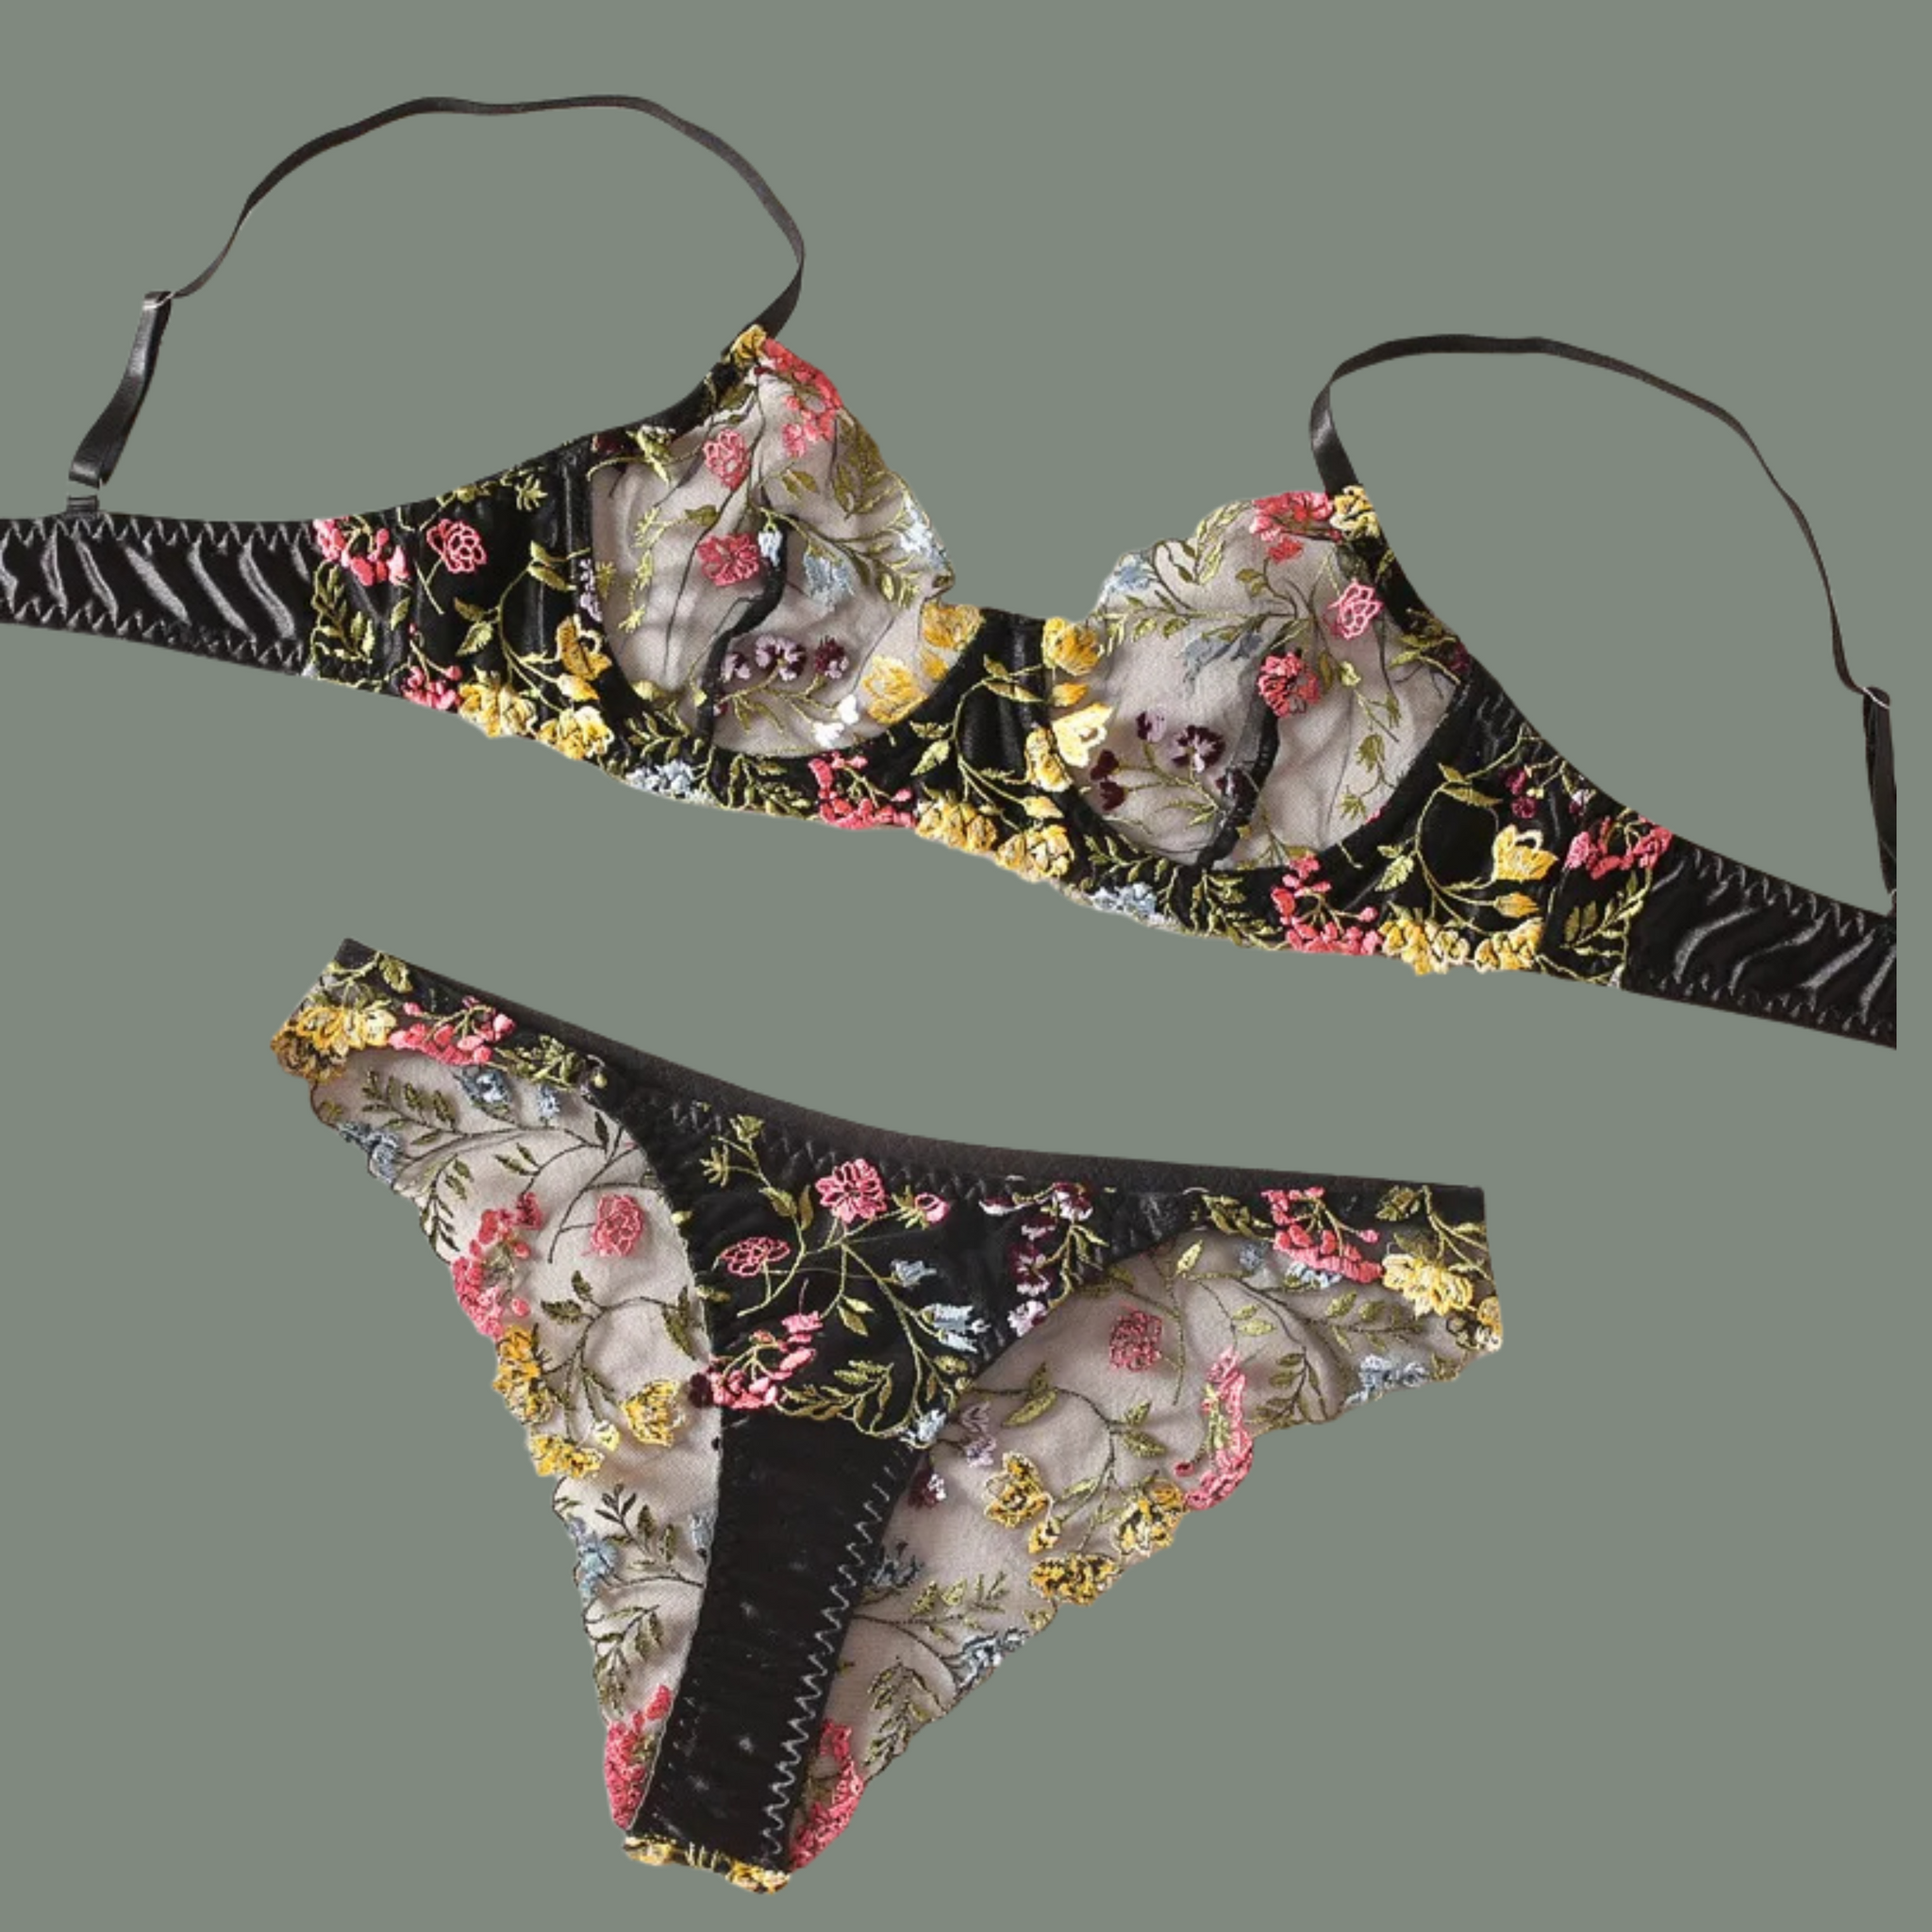 Buy online Set Of 2 Floral Print Bras from lingerie for Women by Pashnpeck  for ₹899 at 0% off